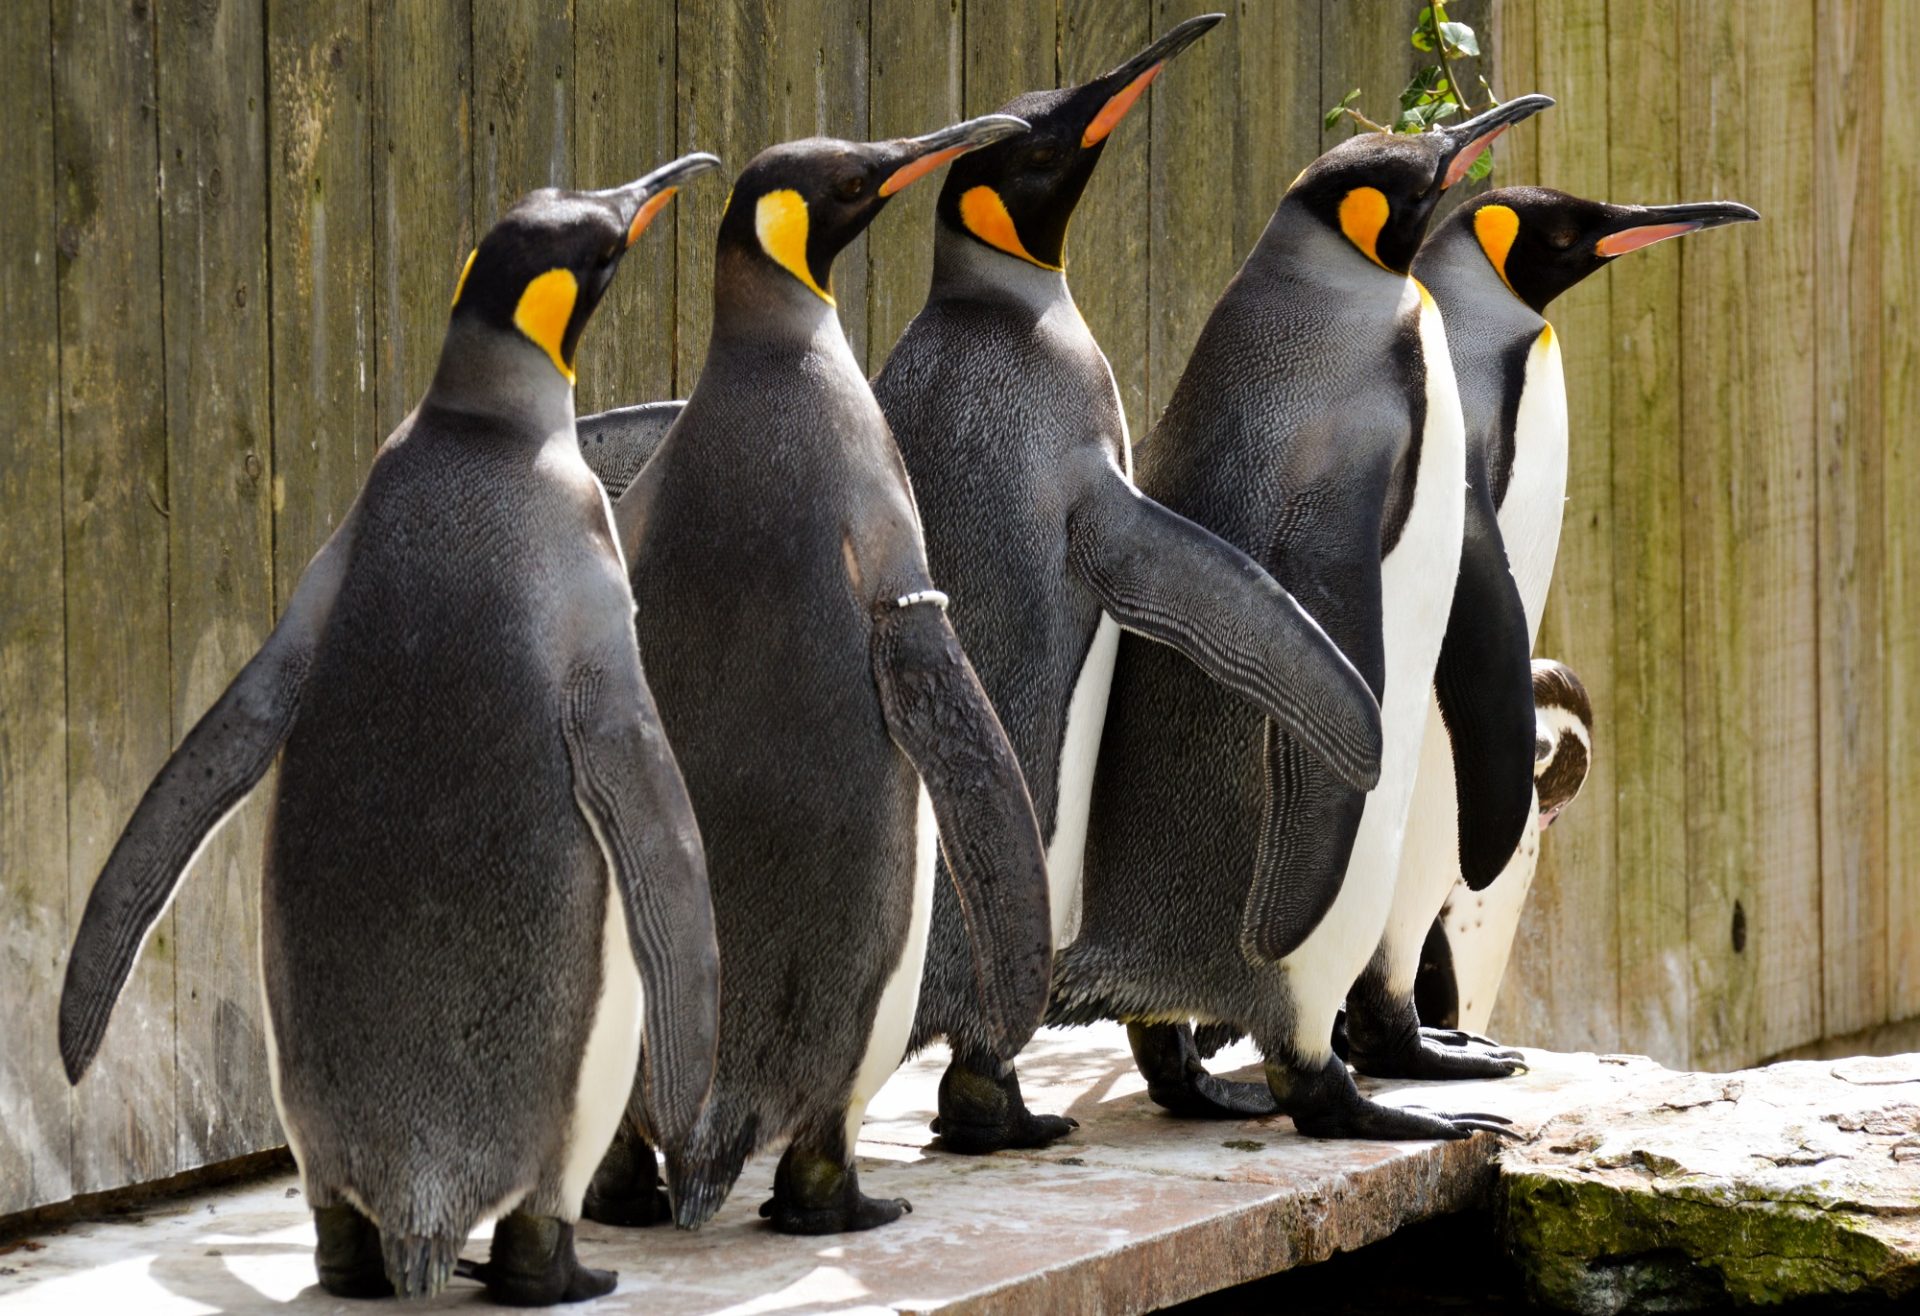 Spike in the middle of a king penguin queue at Birdland Park Gardens - New Dates Released for Birdland’s VIP Penguin Feeding Experiences